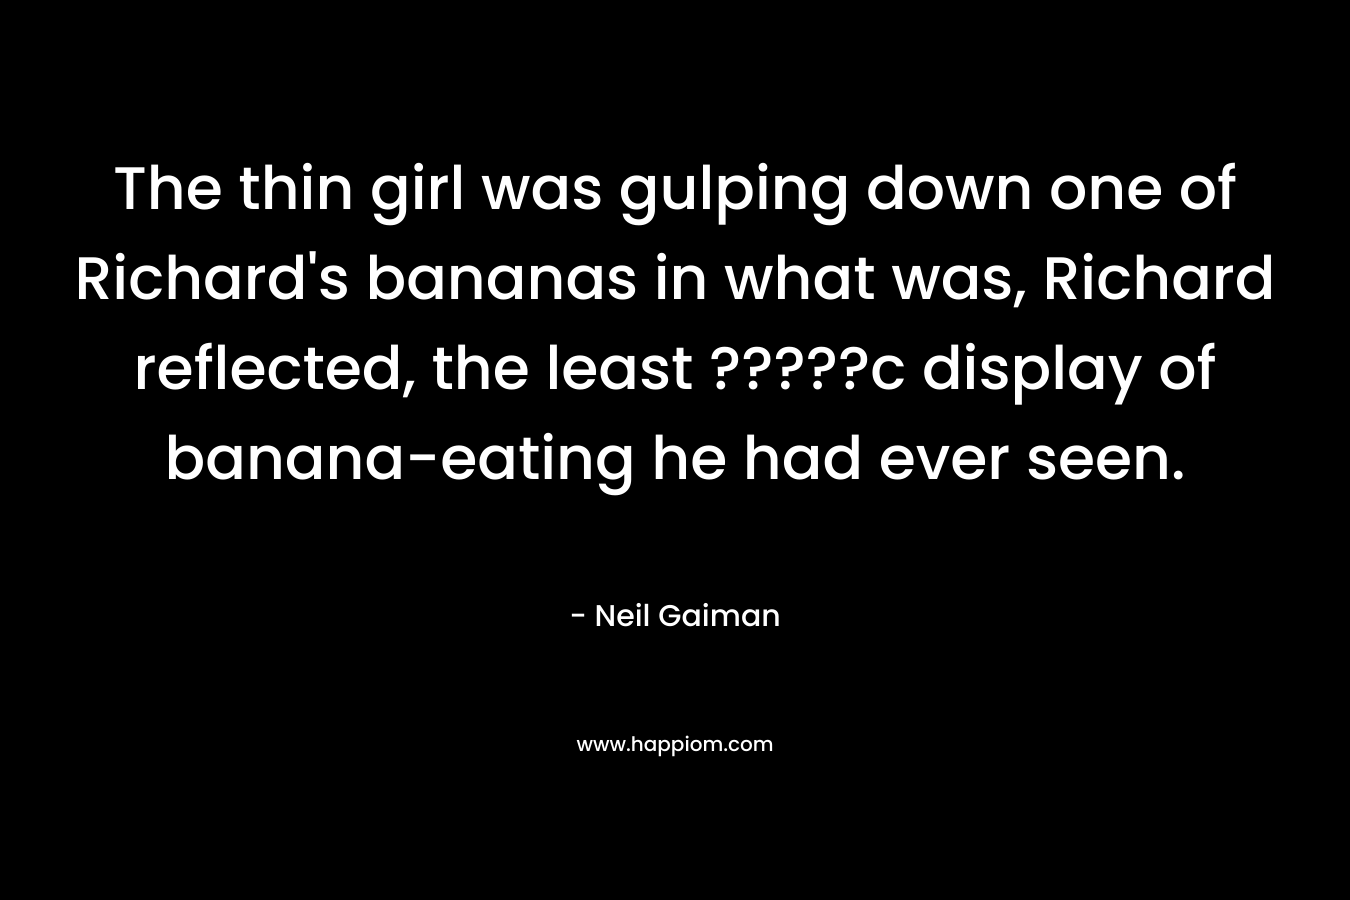 The thin girl was gulping down one of Richard’s bananas in what was, Richard reflected, the least ?????c display of banana-eating he had ever seen. – Neil Gaiman